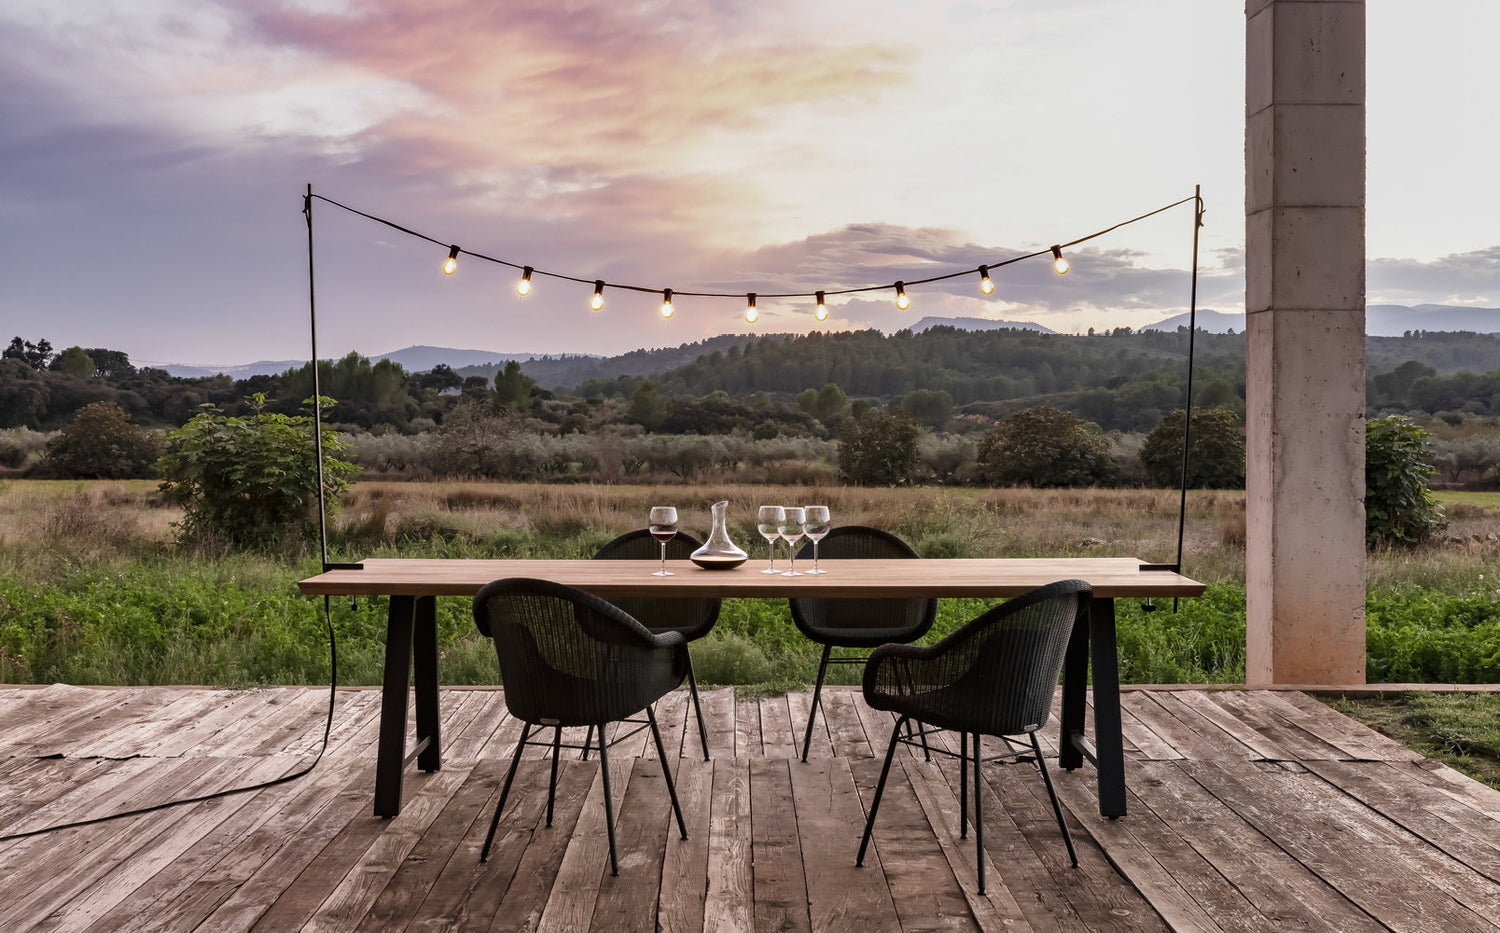 Vincent Sheppard Matteo dining table outdoor